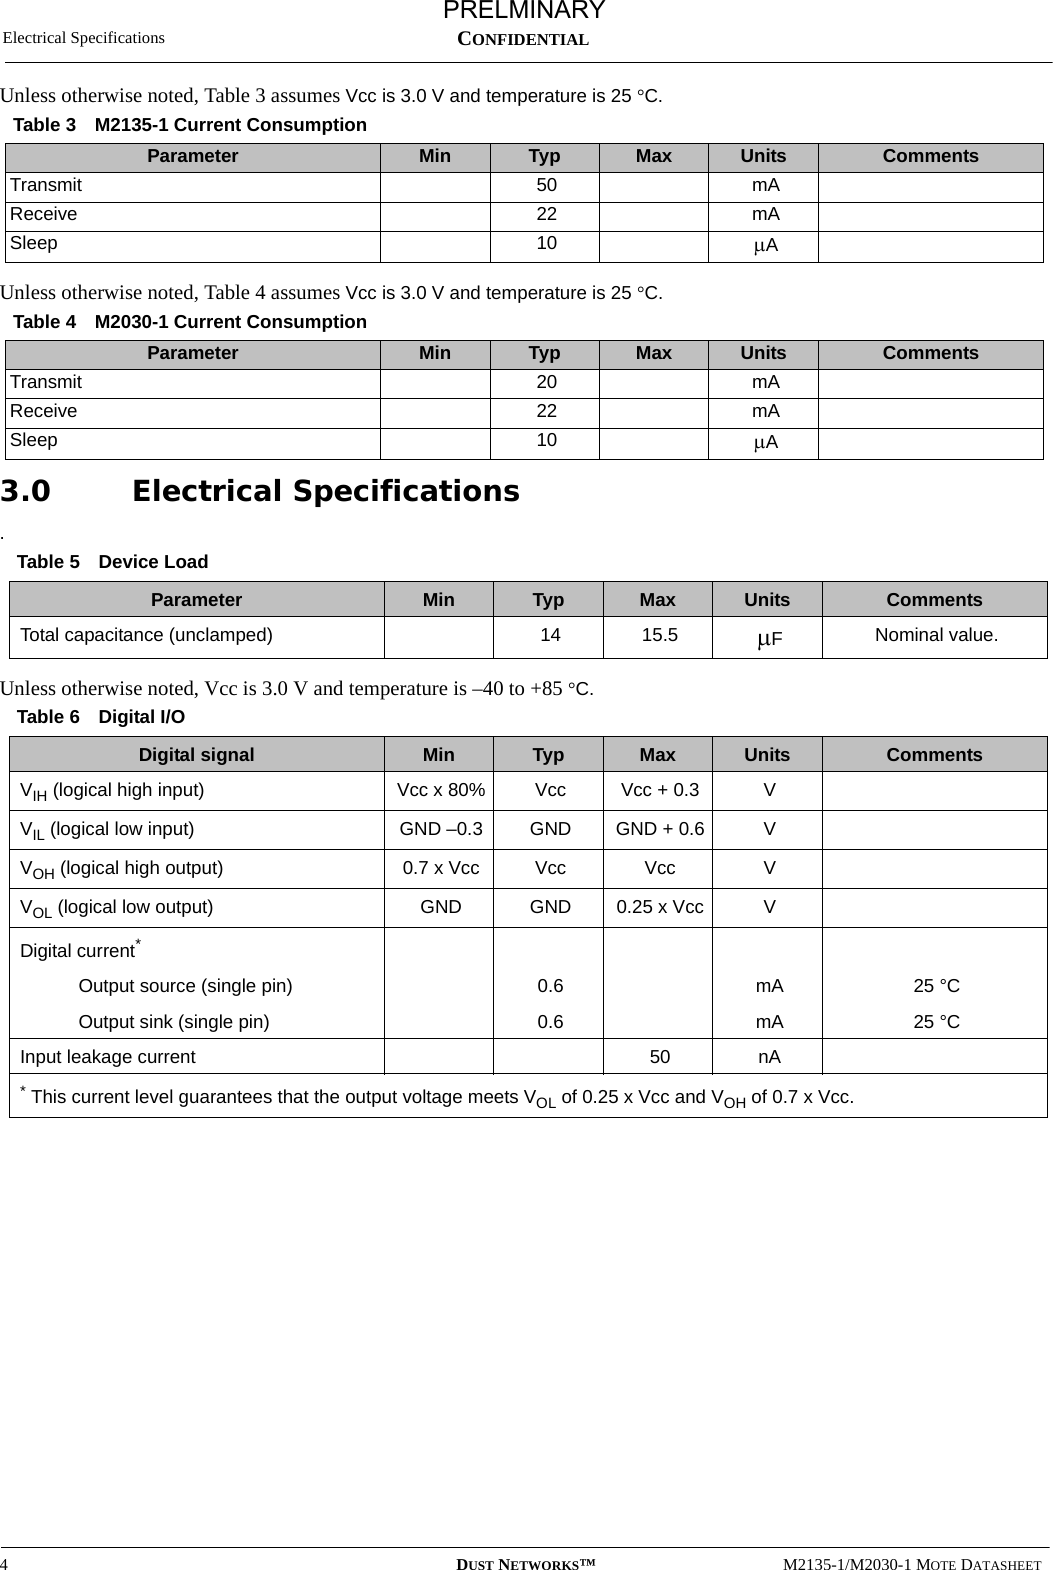 Electrical Specifications4DUST NETWORKS™M2135-1/M2030-1 MOTE DATASHEETCONFIDENTIALUnless otherwise noted, Table 3 assumes Vcc is 3.0 V and temperature is 25 °C.  Unless otherwise noted, Table 4 assumes Vcc is 3.0 V and temperature is 25 °C. 3.0 Electrical Specifications.Unless otherwise noted, Vcc is 3.0 V and temperature is –40 to +85 °C.Table 3 M2135-1 Current ConsumptionParameter Min Typ Max Units CommentsTransmit 50 mAReceive 22 mASleep 10 µATable 4 M2030-1 Current ConsumptionParameter Min Typ Max Units CommentsTransmit 20 mAReceive 22 mASleep 10 µATable 5 Device LoadParameter Min Typ Max Units CommentsTotal capacitance (unclamped) 14 15.5 µFNominal value.Table 6 Digital I/ODigital signal Min Typ Max Units CommentsVIH (logical high input)  Vcc x 80% Vcc Vcc + 0.3 VVIL (logical low input)  GND –0.3 GND GND + 0.6 VVOH (logical high output)  0.7 x Vcc Vcc Vcc VVOL (logical low output)  GND GND 0.25 x Vcc VDigital current*Output source (single pin) 0.6 mA 25 °COutput sink (single pin) 0.6 mA 25 °CInput leakage current 50 nA* This current level guarantees that the output voltage meets VOL of 0.25 x Vcc and VOH of 0.7 x Vcc.PRELMINARY